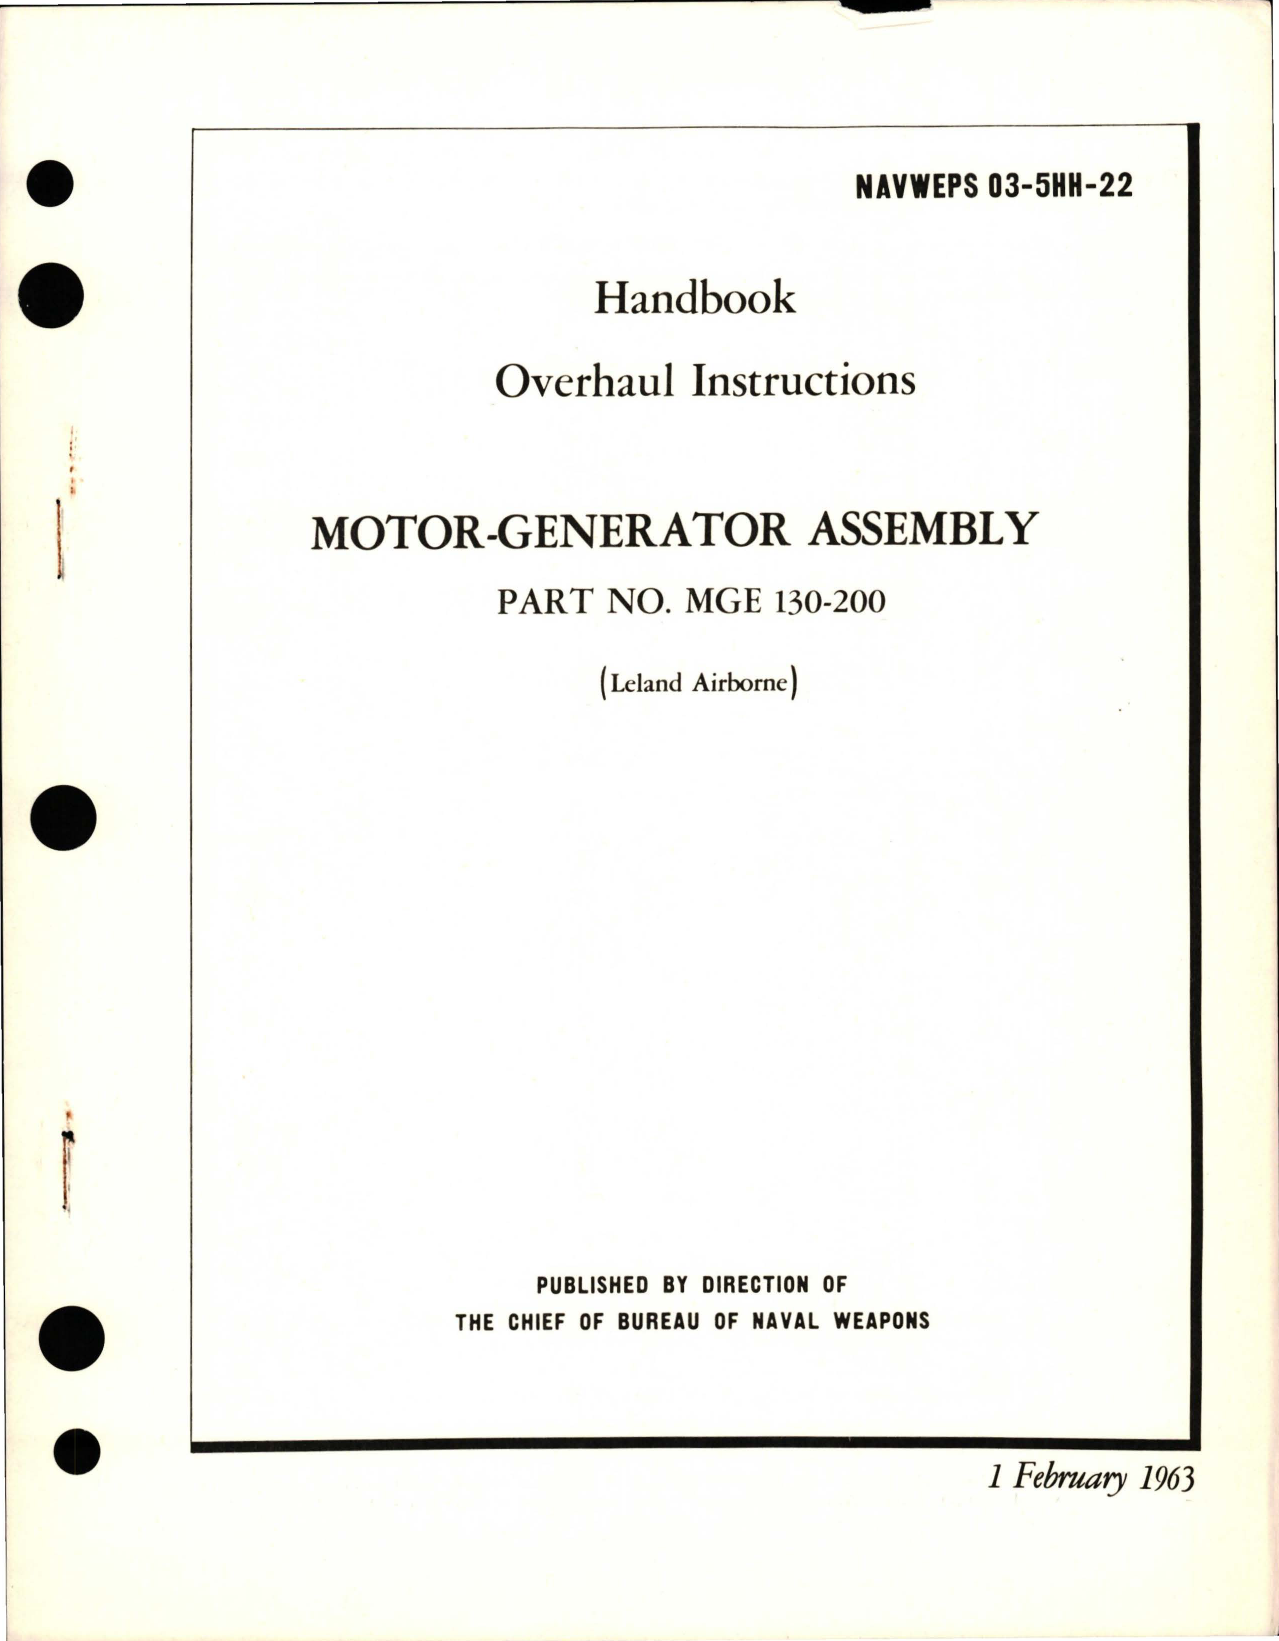 Sample page 1 from AirCorps Library document: Overhaul Instructions for Motor-Generator Assembly - Part MGE 130-200 